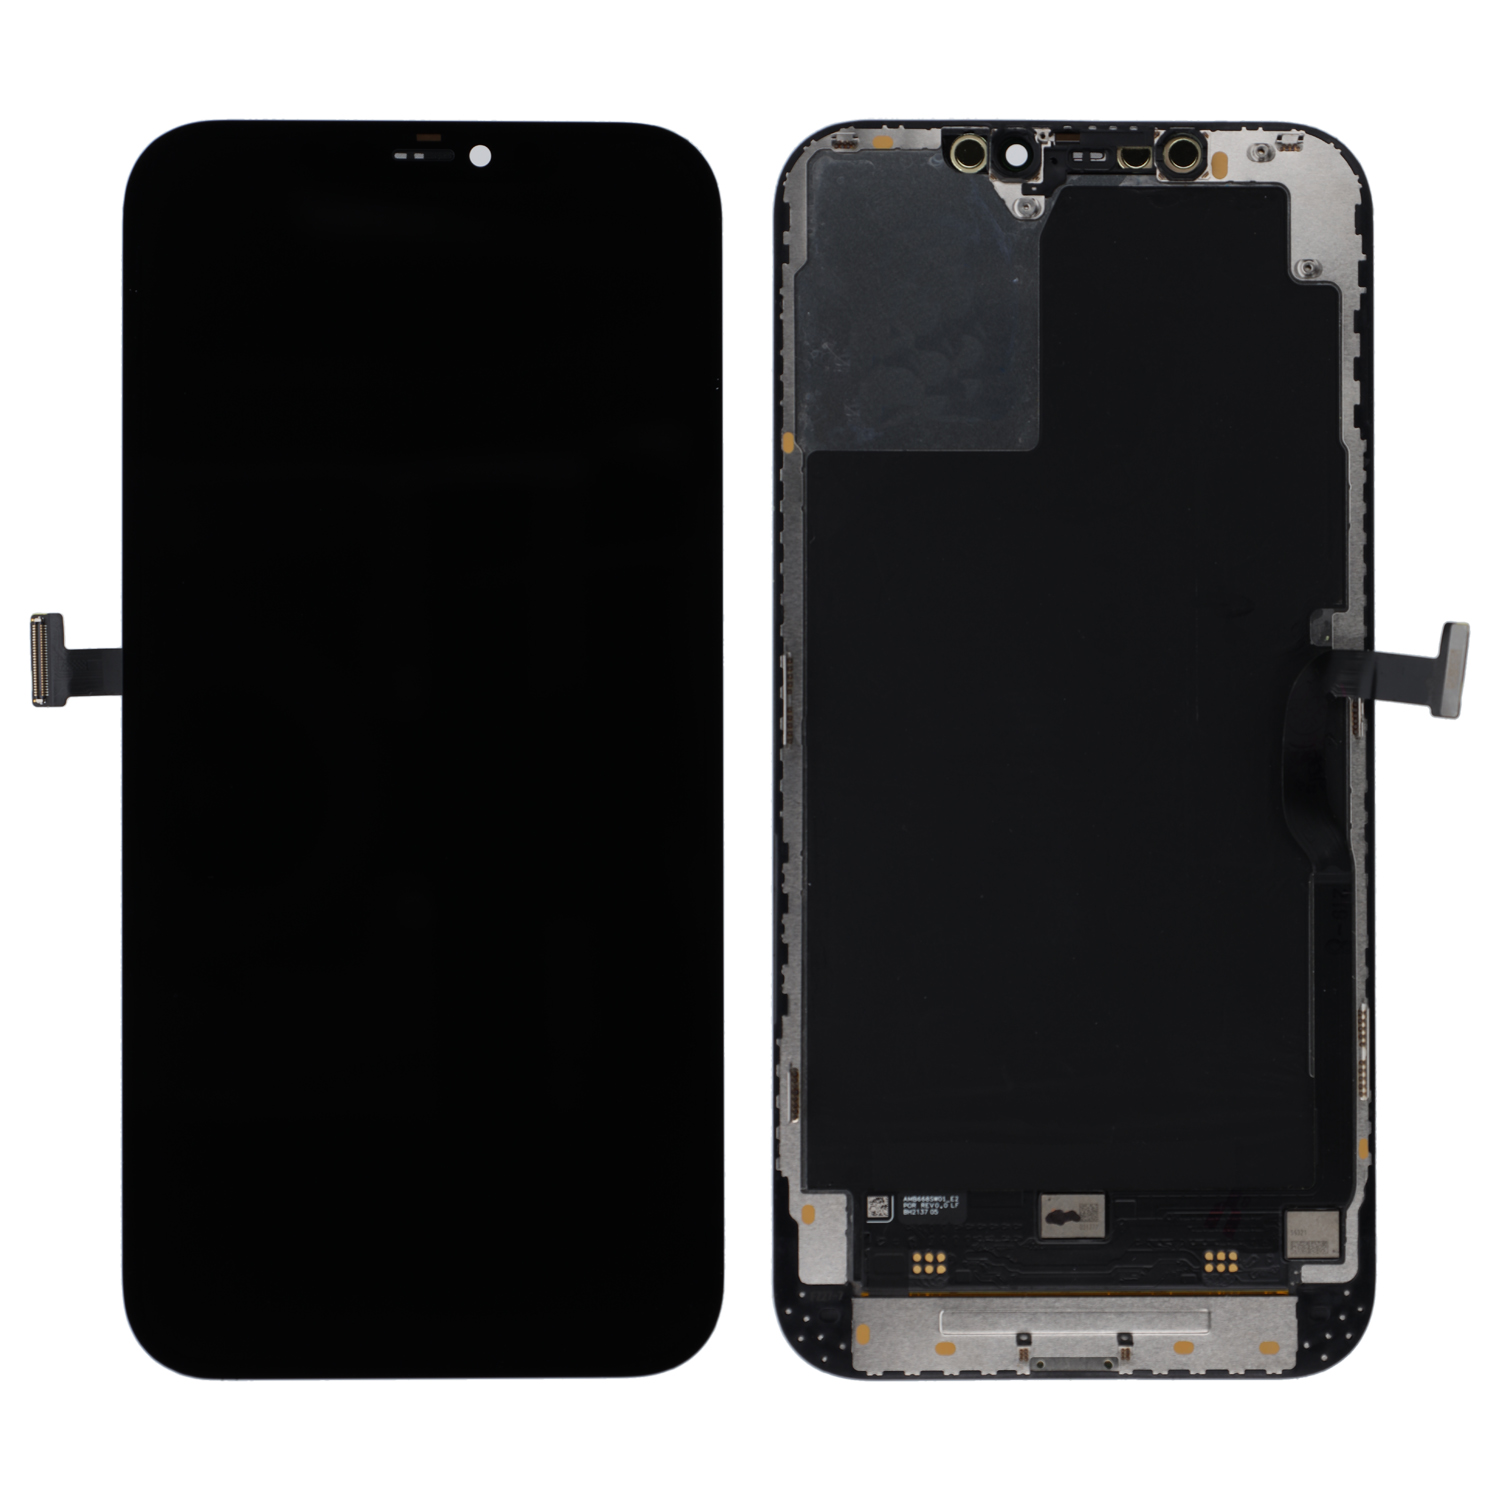 LCD Display compatible with iPhone 12 Pro Max (A2411), Refurbished